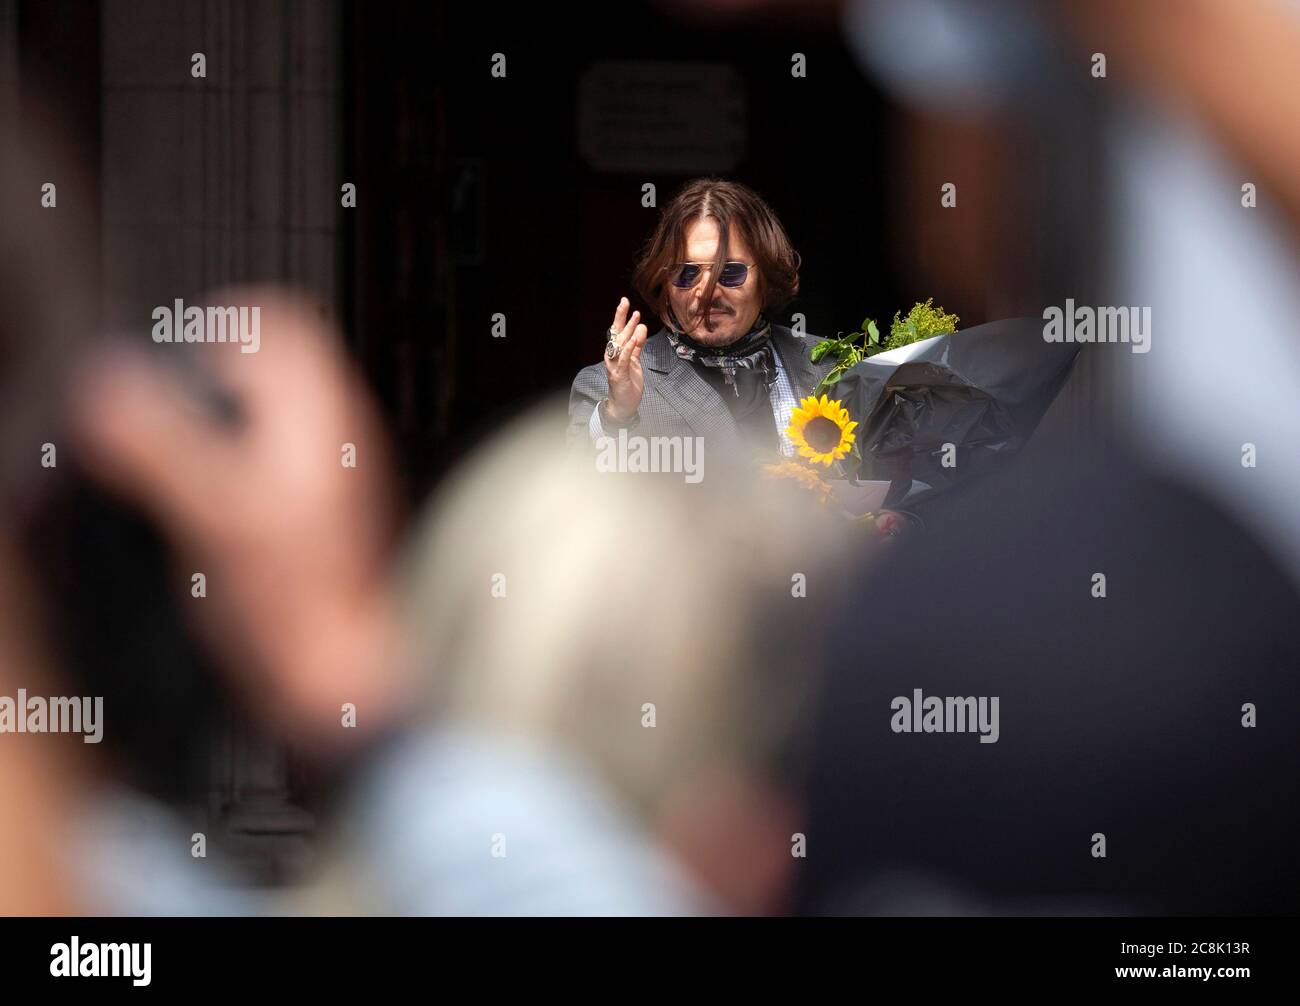 Hollywood actor and musician Johnny Depp arrives at the high court, on day 13 of his libel trial against The Sun's publishers NGN Stock Photo